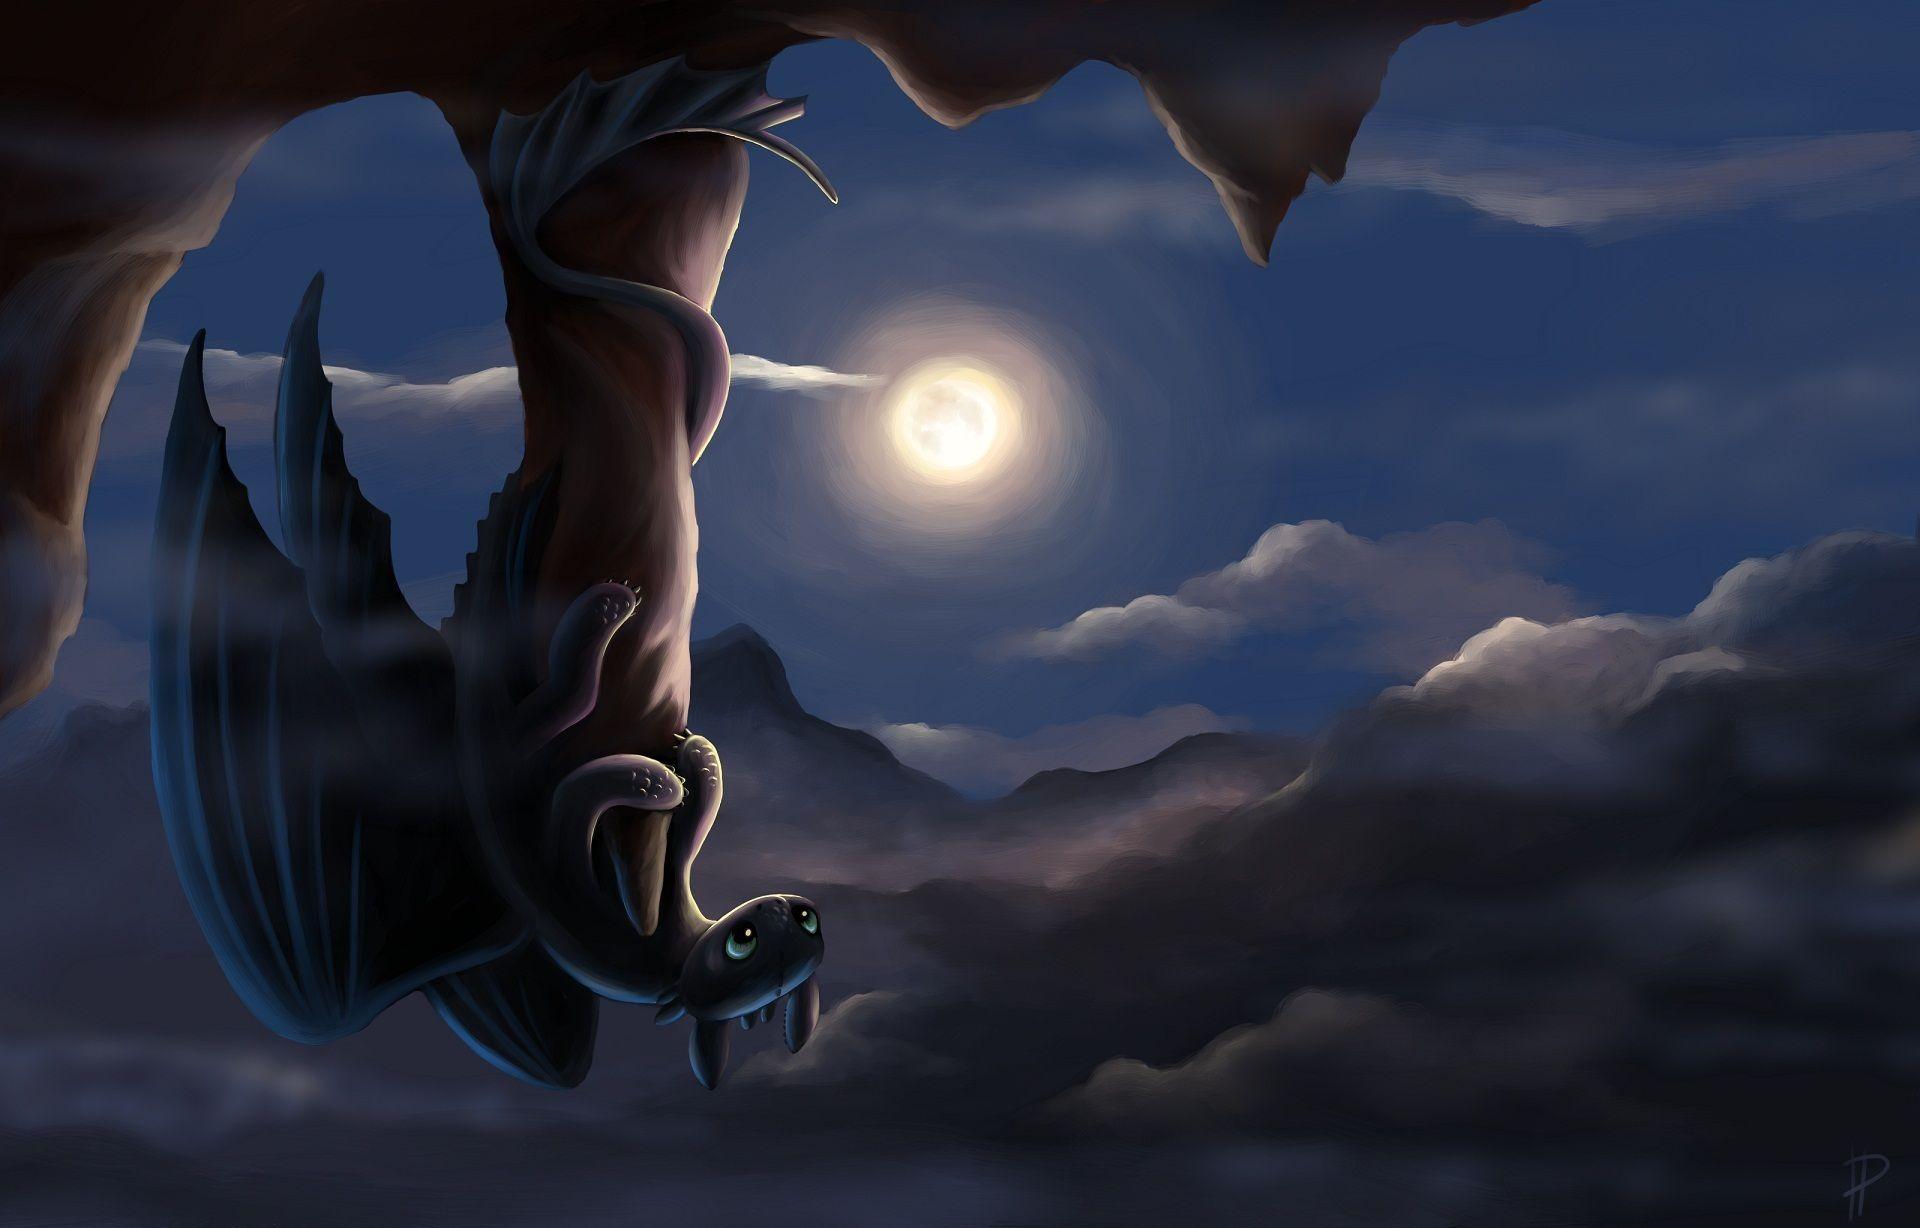 Toothless Dragon Wallpaper, HDQ Toothless Dragon Image Collection